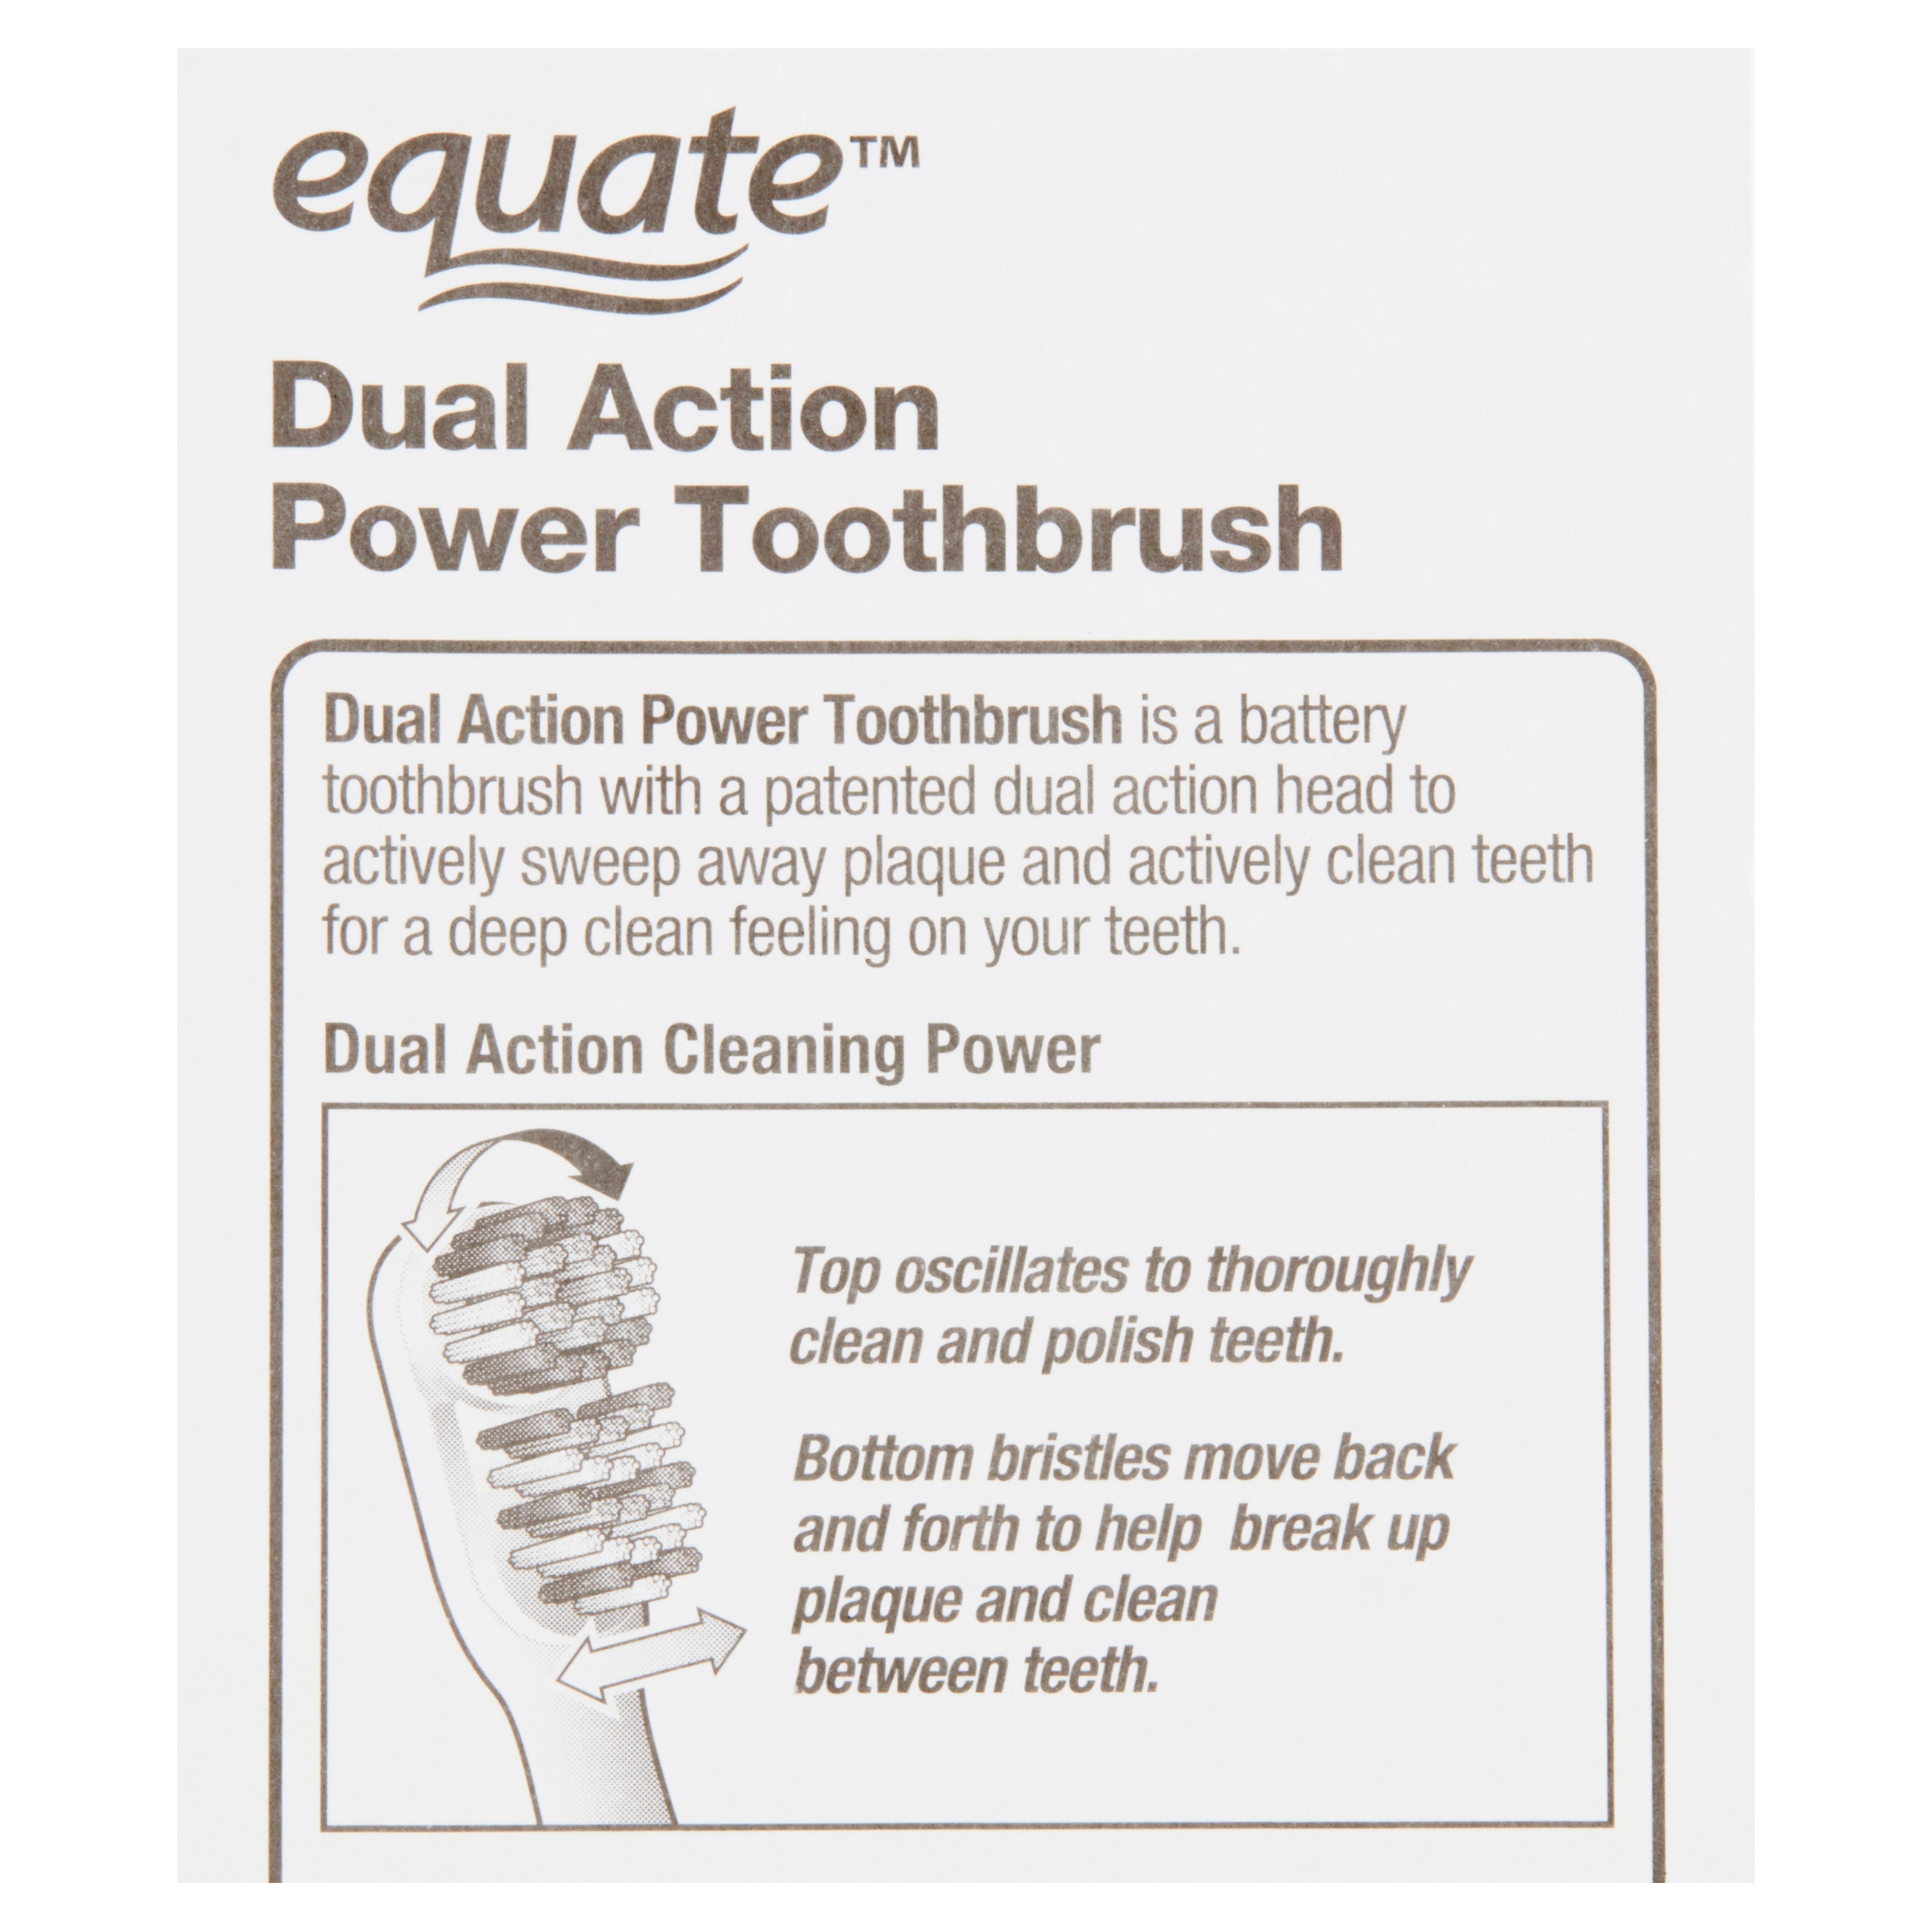 Equate soft dual action power toothbrush for deep cleaning, 1 count - image 4 of 9